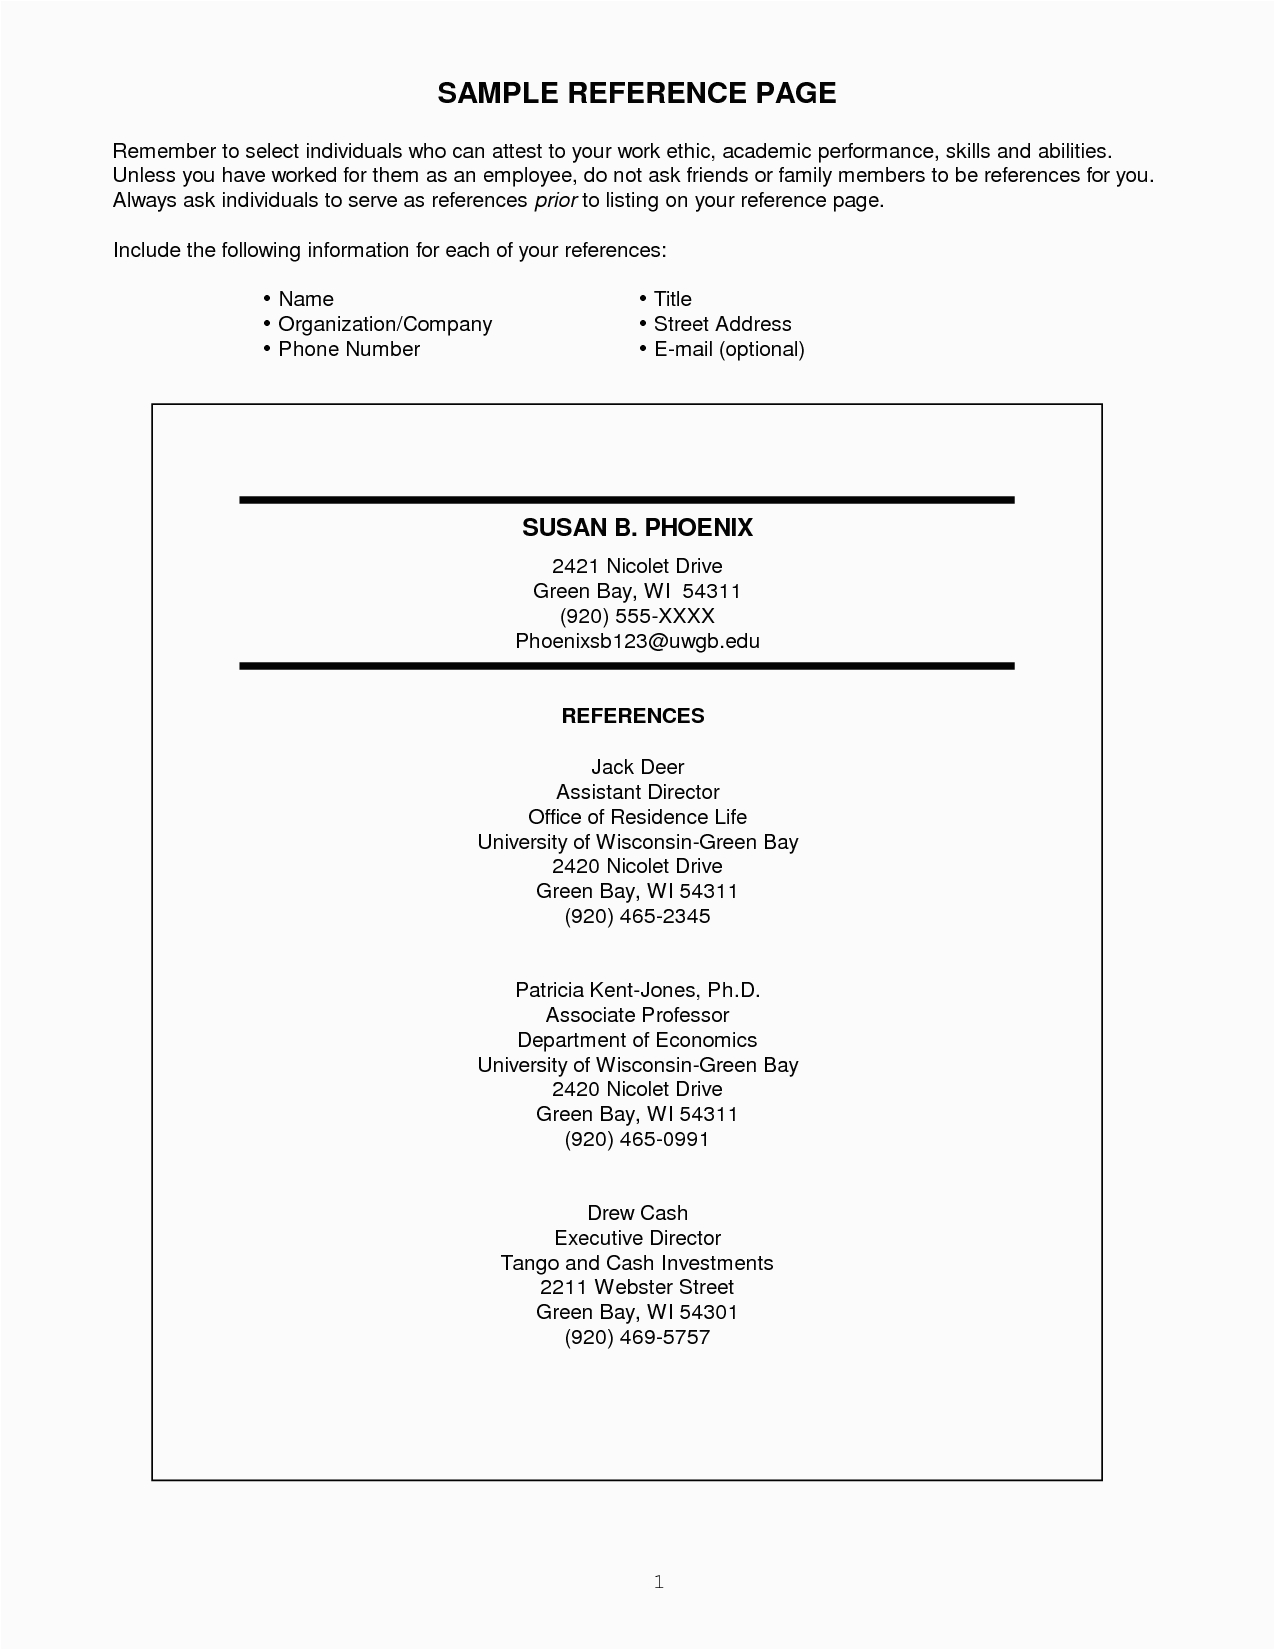 Sample Resume Cover Letter and References Resume Reference Page – Task List Templates